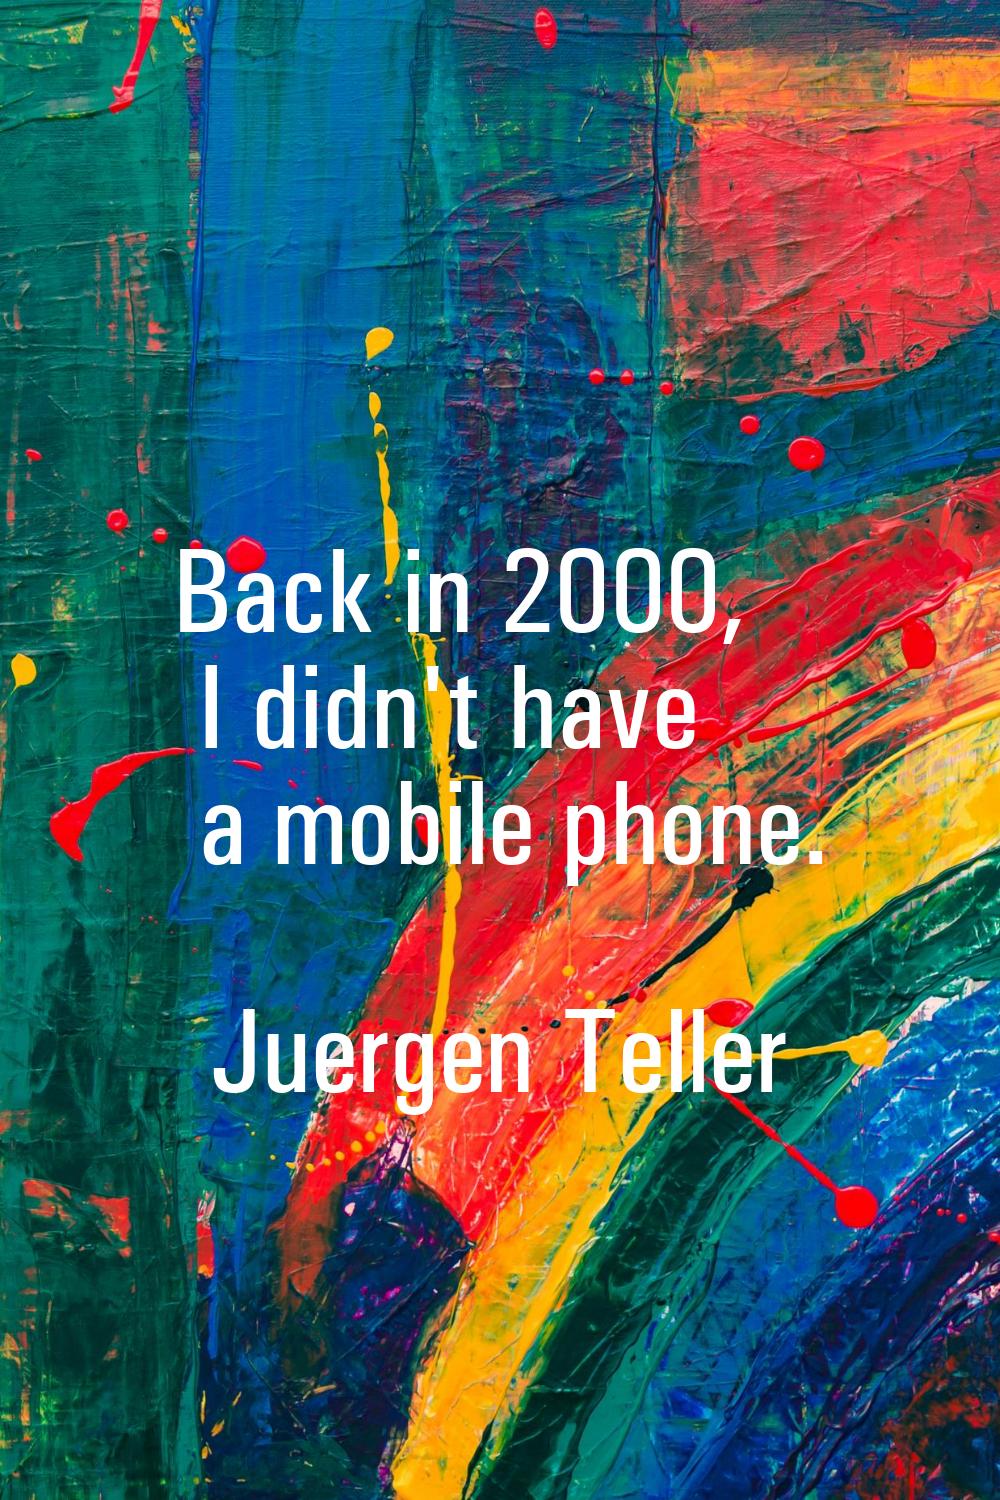 Back in 2000, I didn't have a mobile phone.